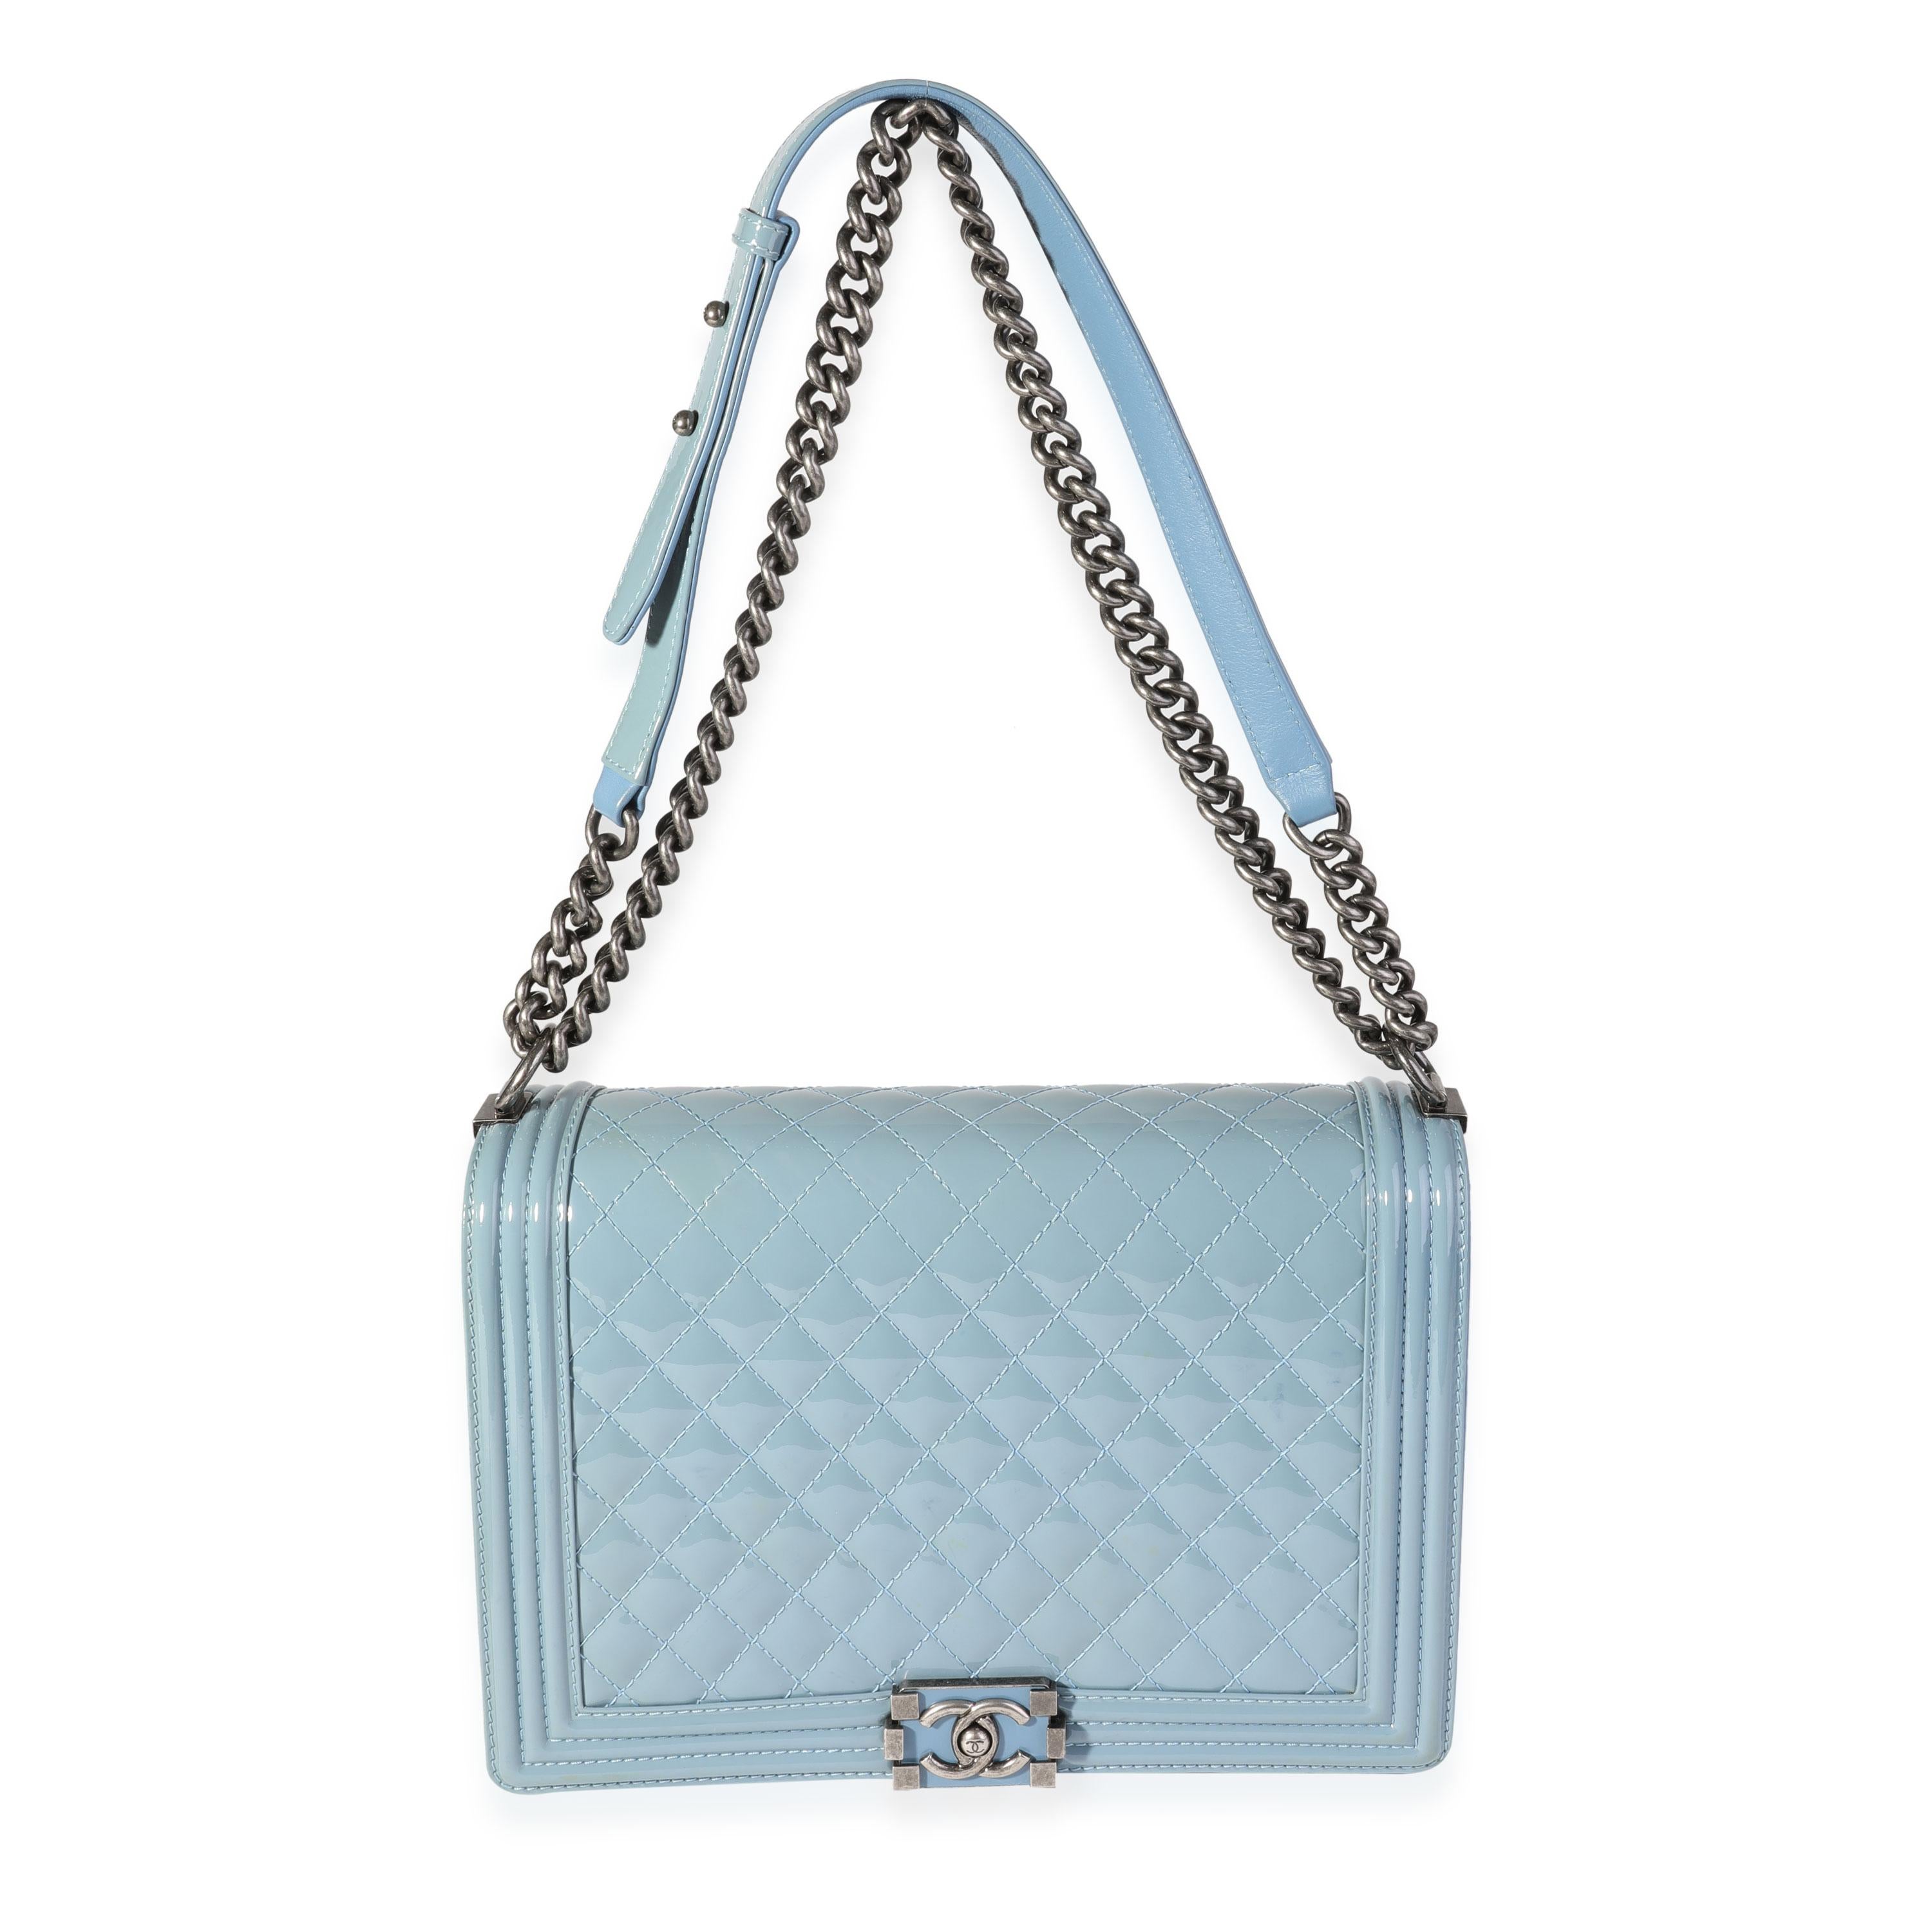 Listing Title: Chanel Light Blue Quilted Patent Leather Large Boy Bag
SKU: 120762
Condition: Pre-owned 
Handbag Condition: Good
Condition Comments: Good Condition. Discoloration throughout. Scuffing to exterior corners and interior.
Brand: